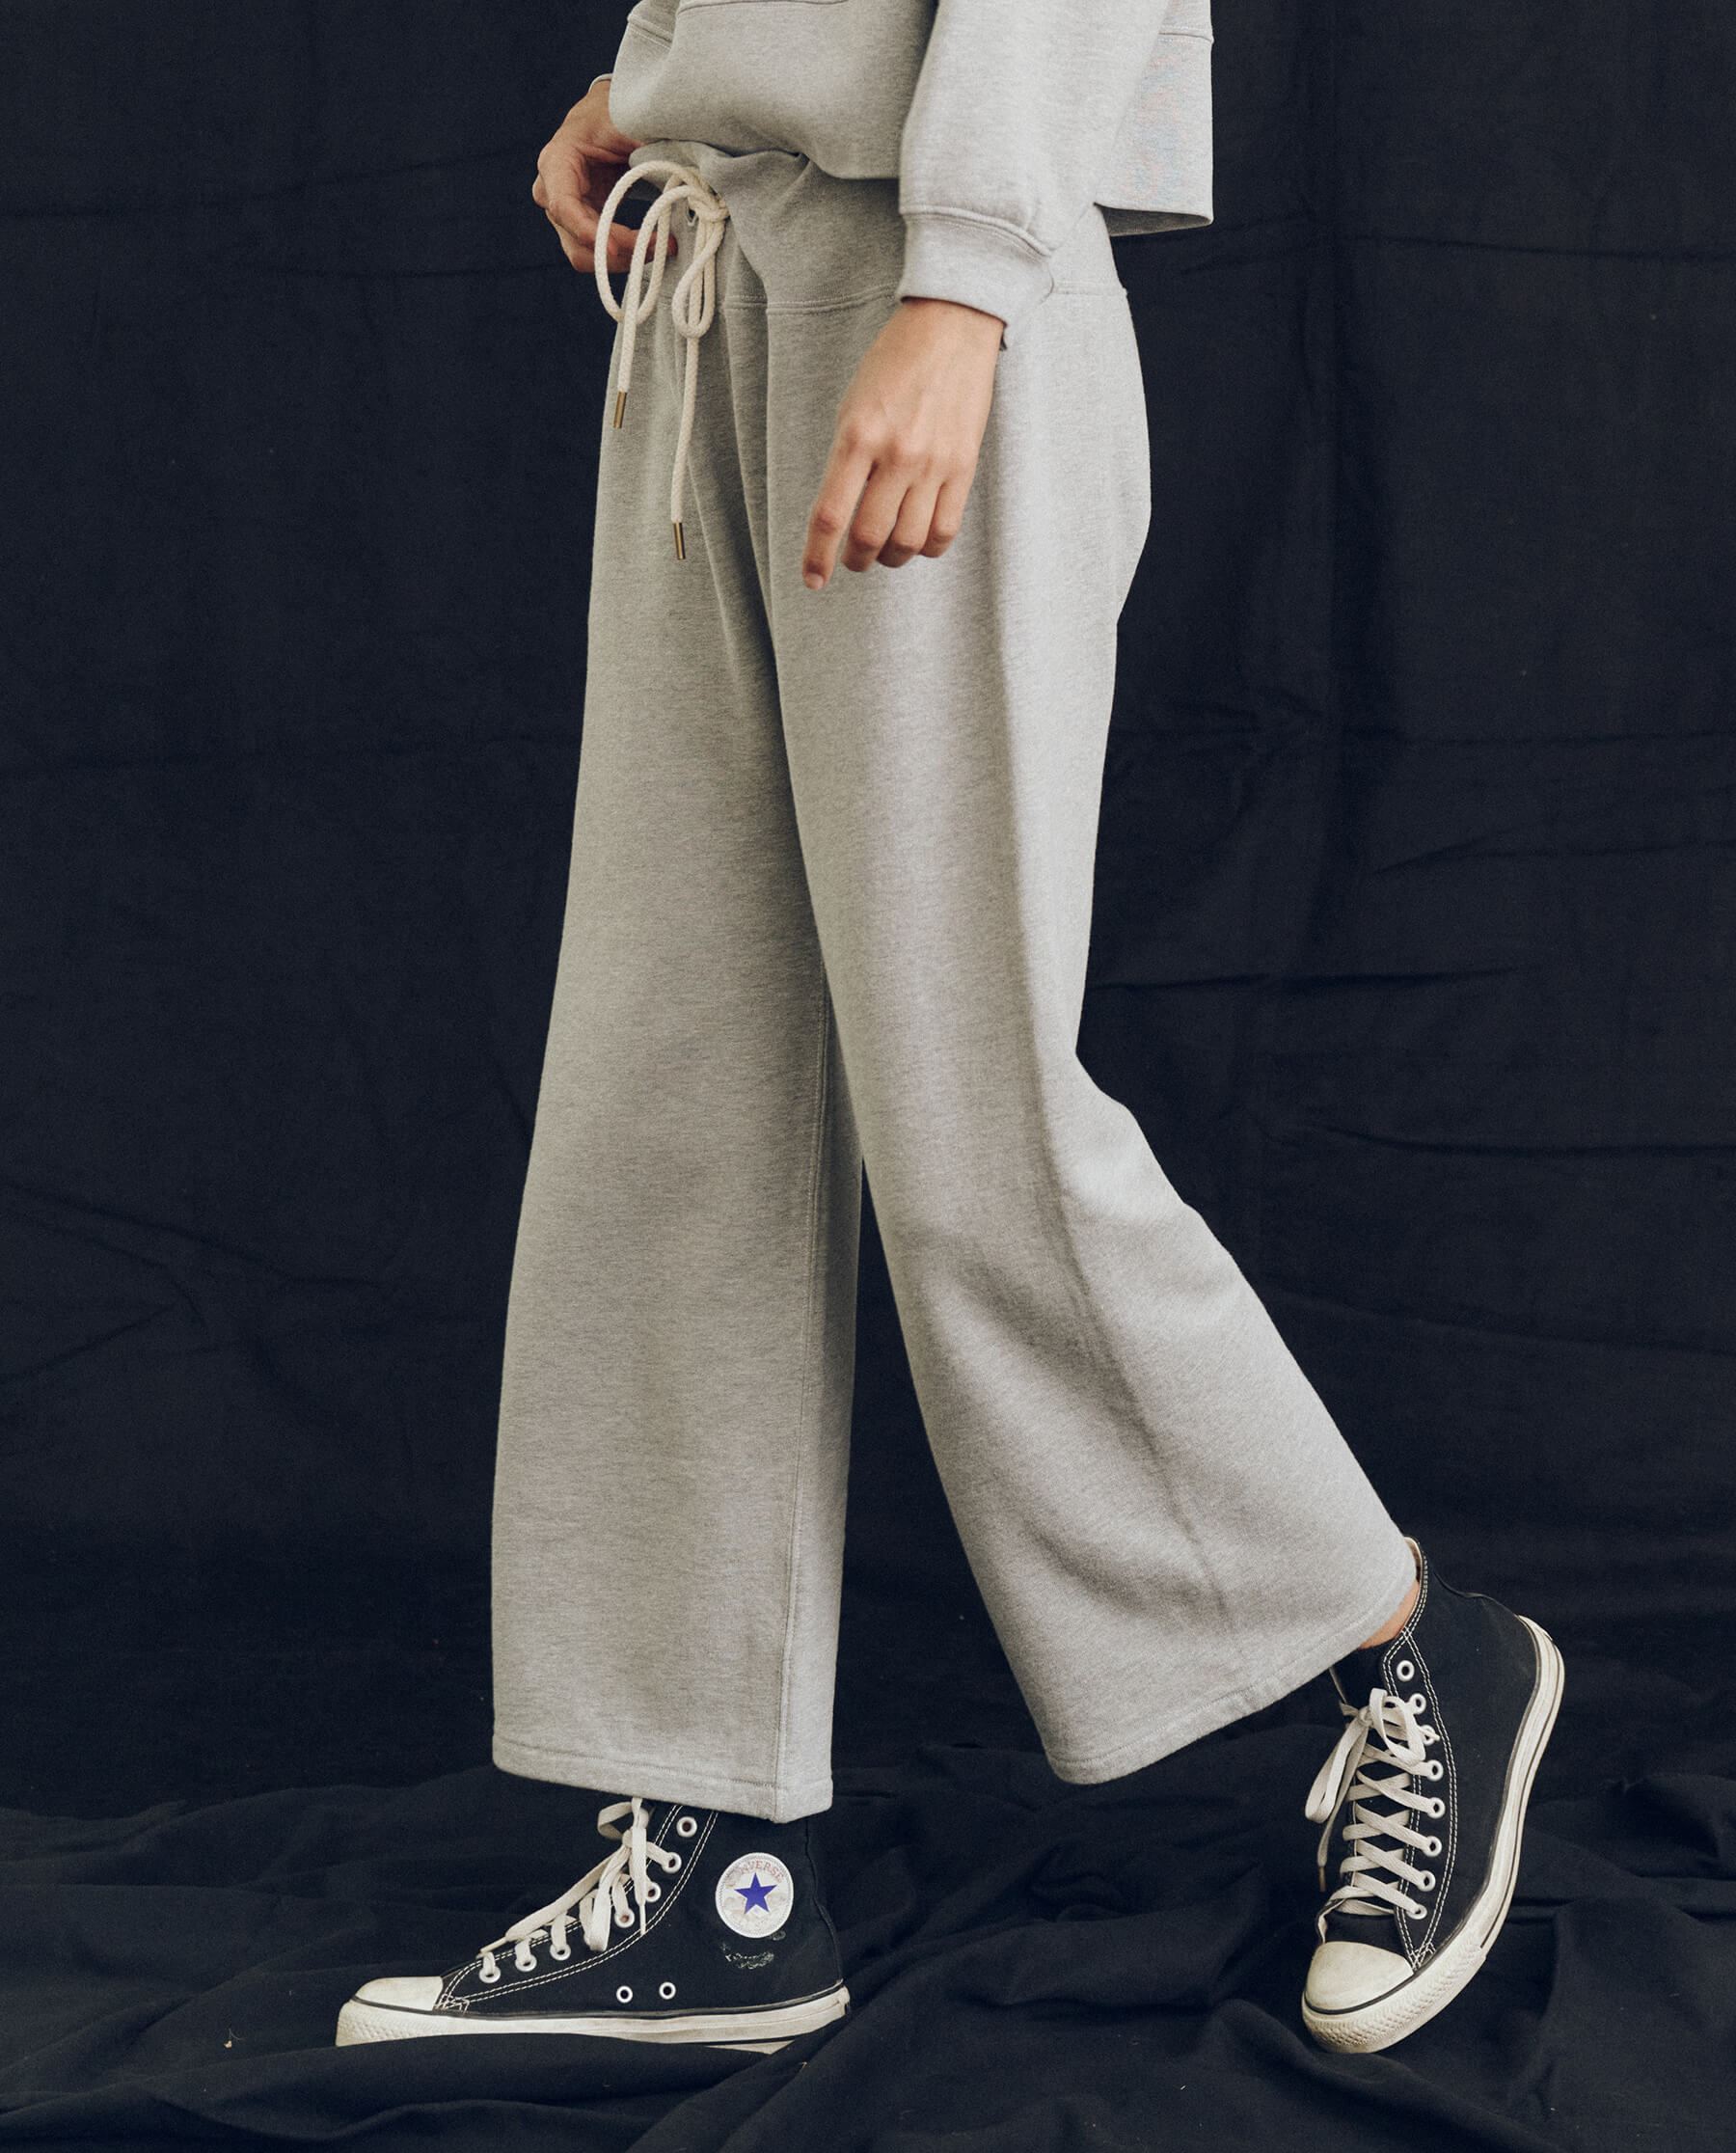 The Relay Sweatpant. Solid -- Lofty Heather Grey SWEATPANTS THE GREAT. PS24 LOFTY KNITS